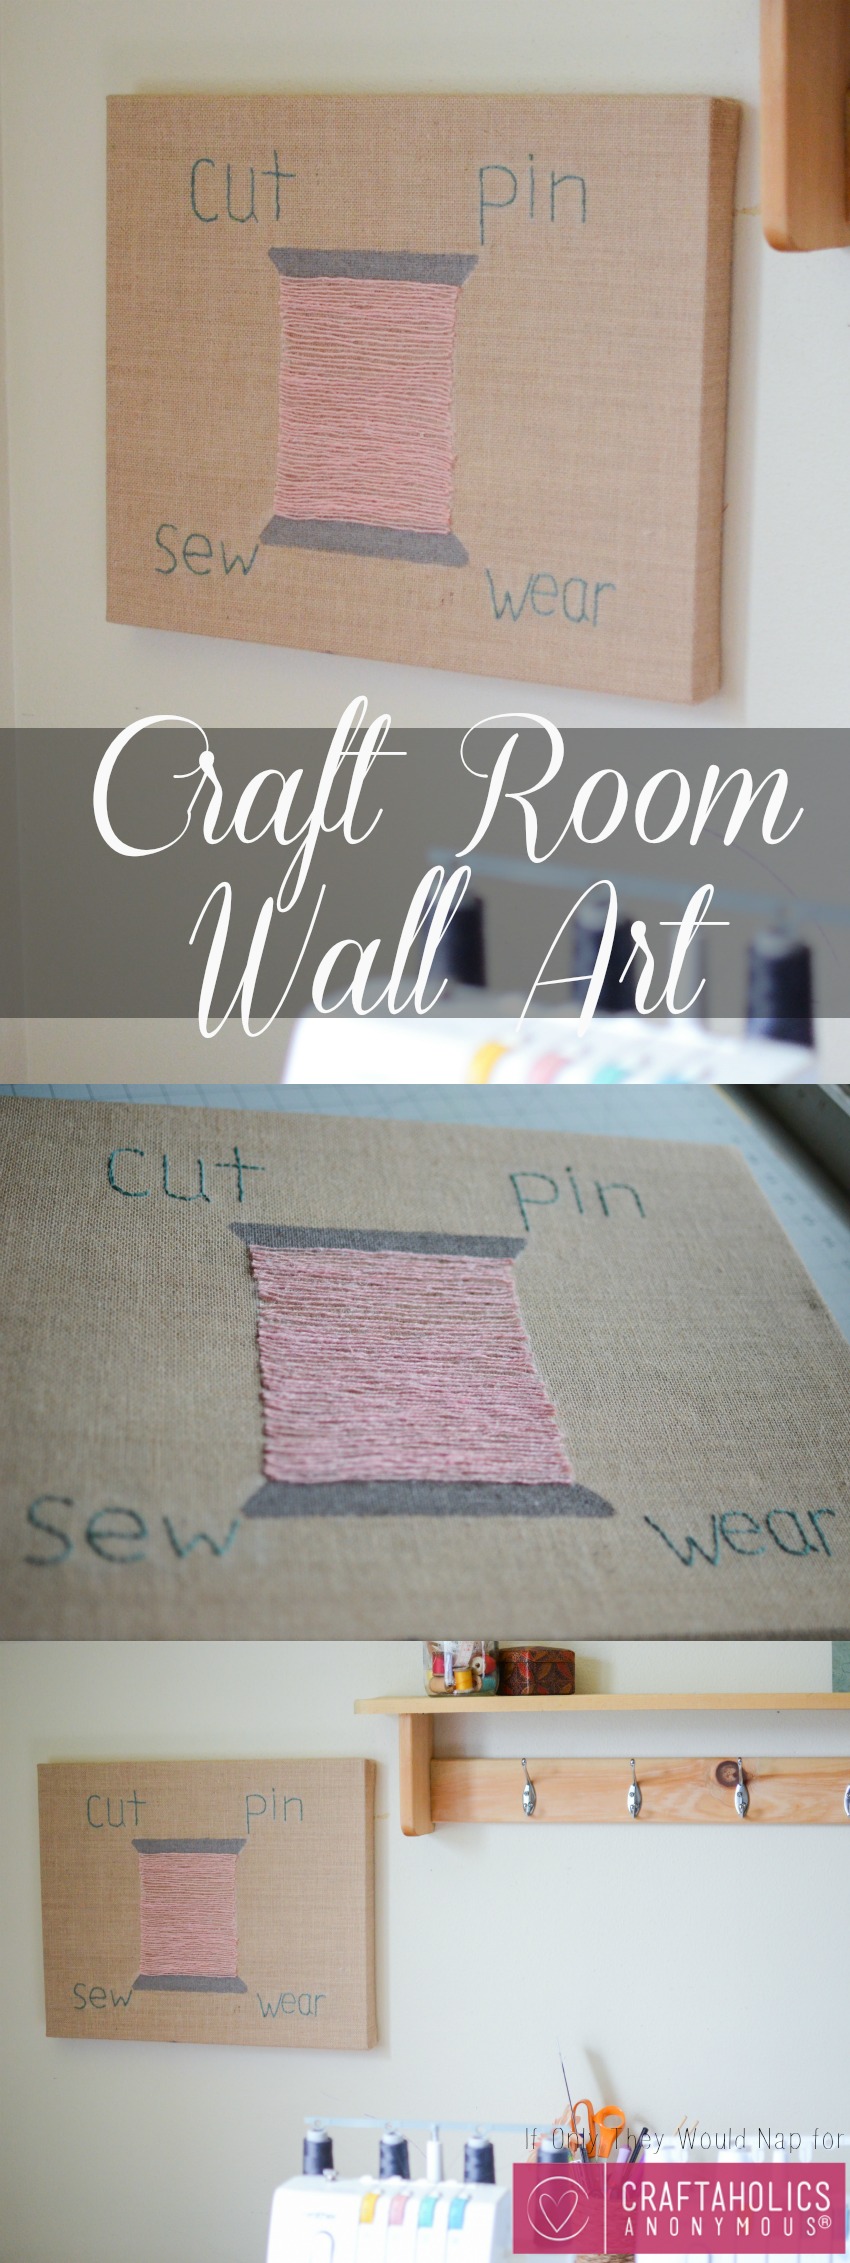 Make Your Own Craft Room Wall Art